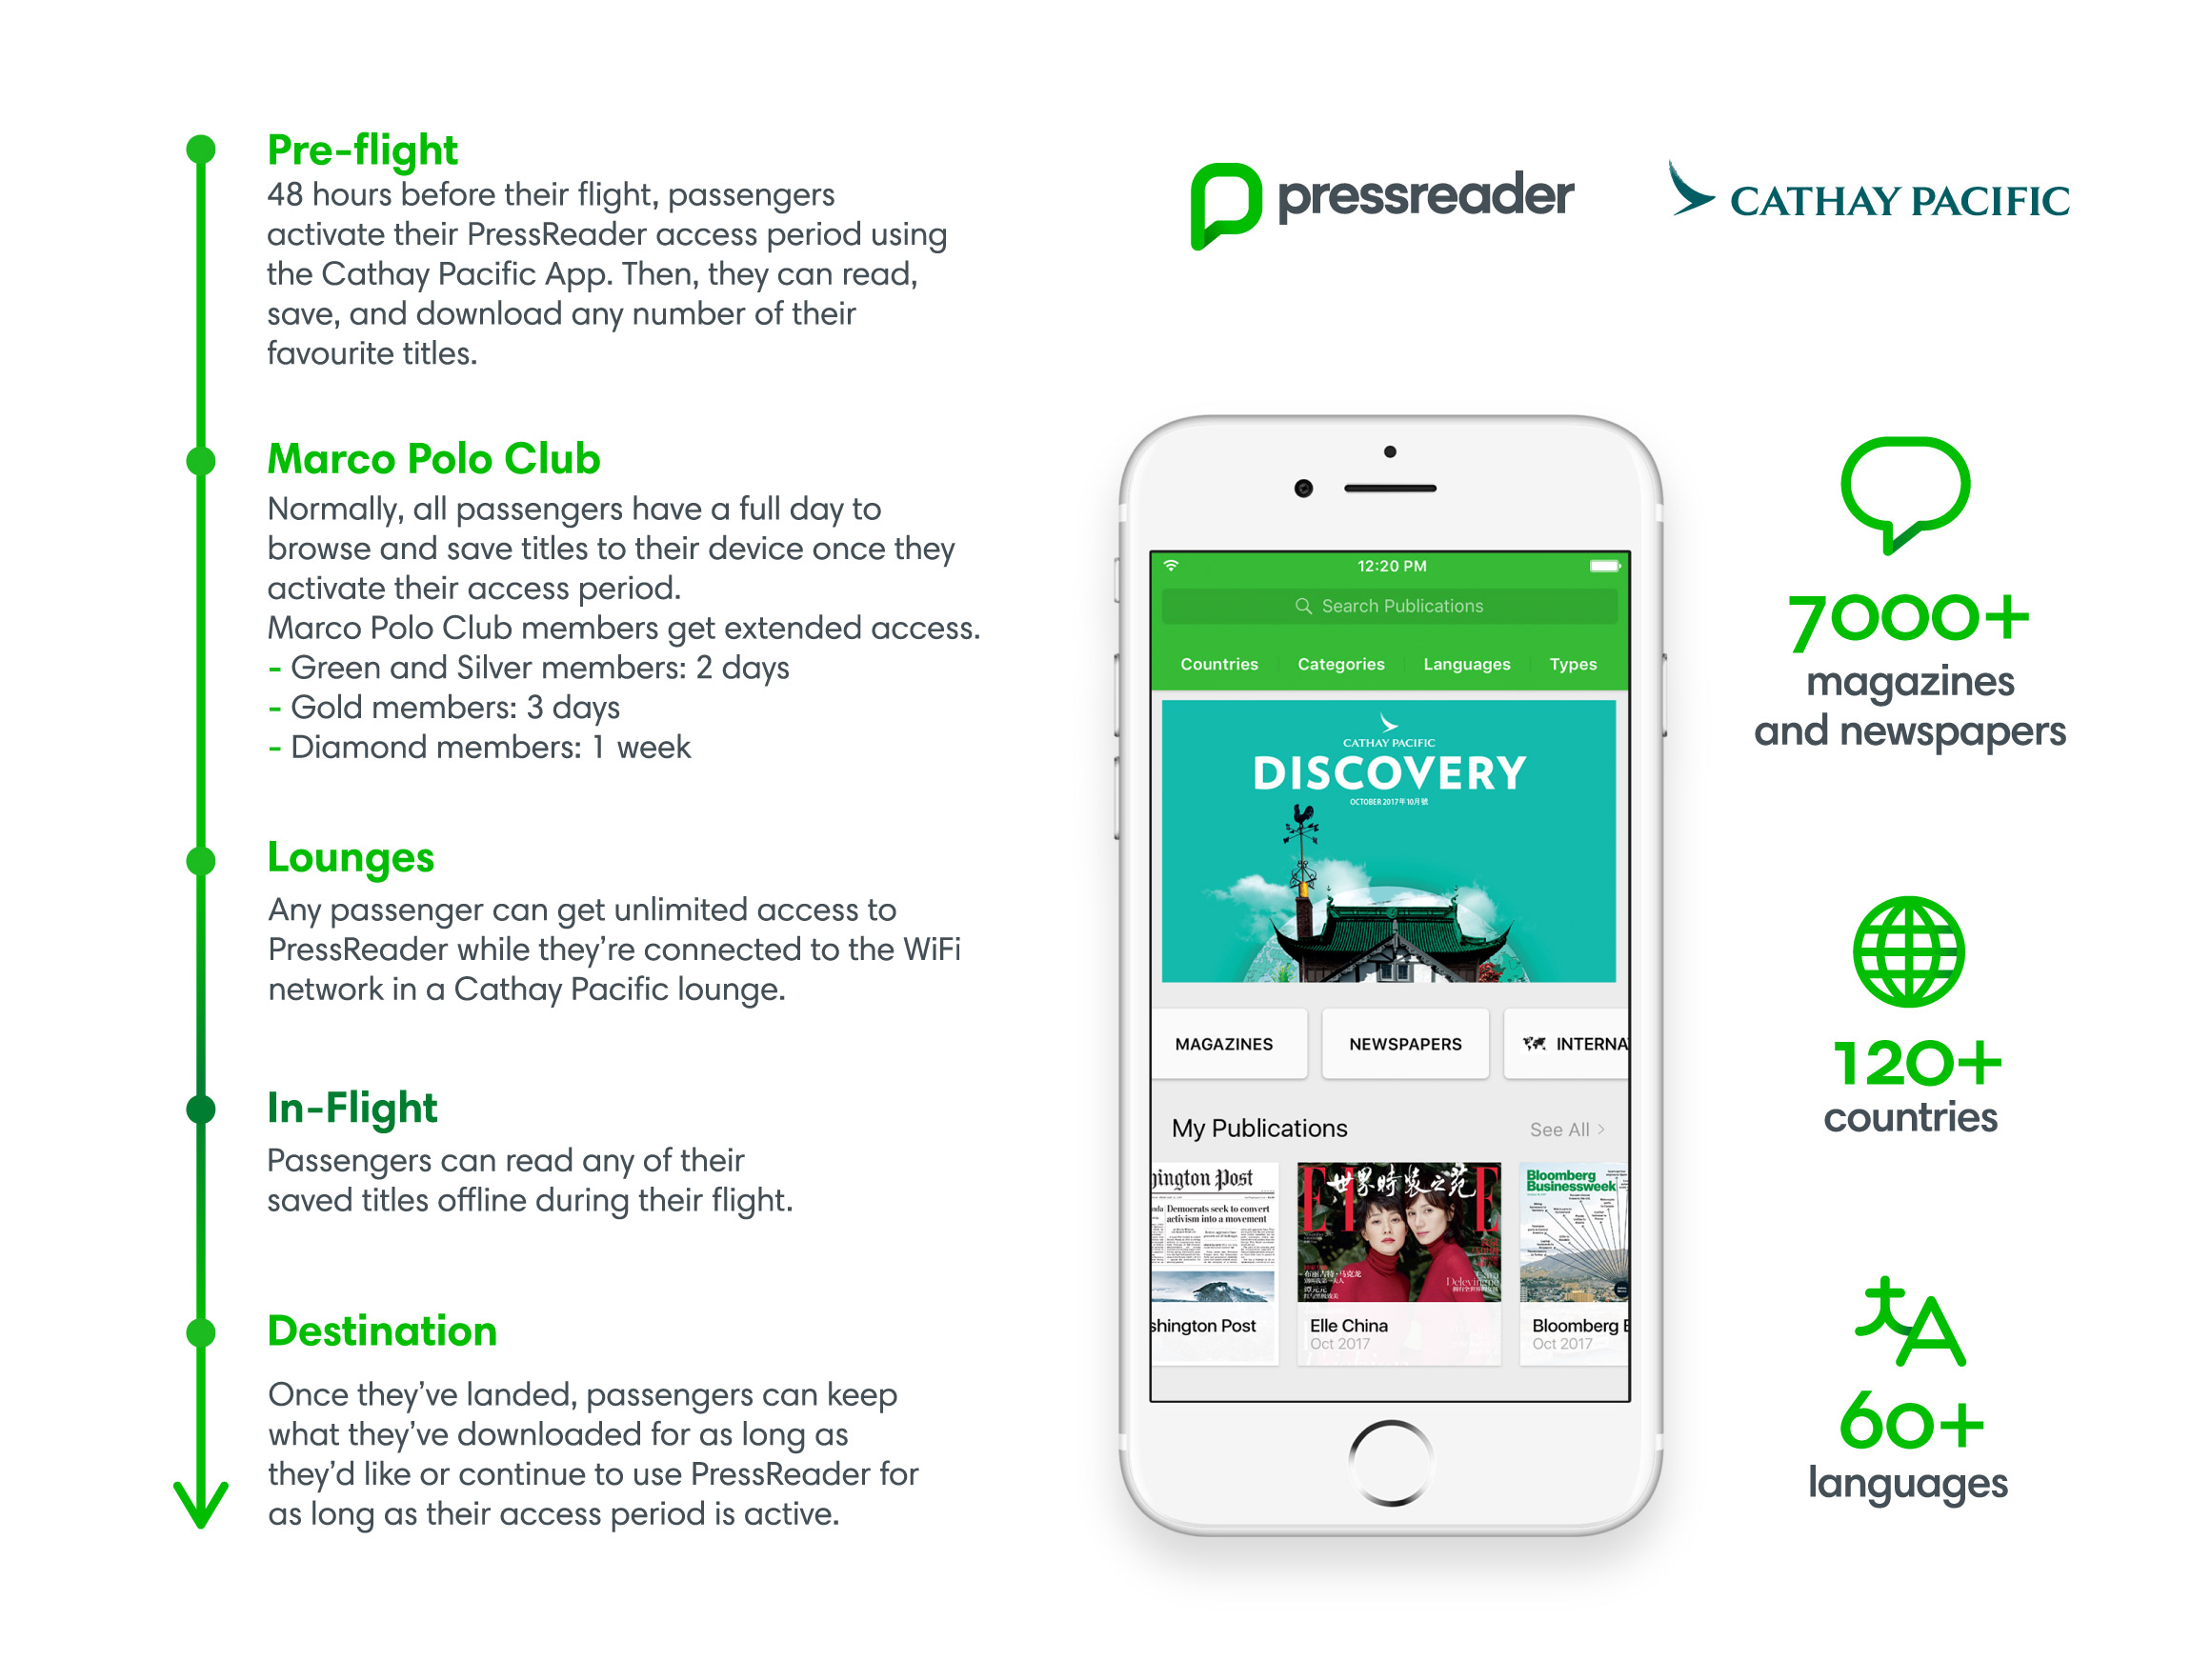 PressReader is integrated directly into the Cathay Pacific app for a seamless, easy-to-navigate user experience that extends far beyond the flight itself.